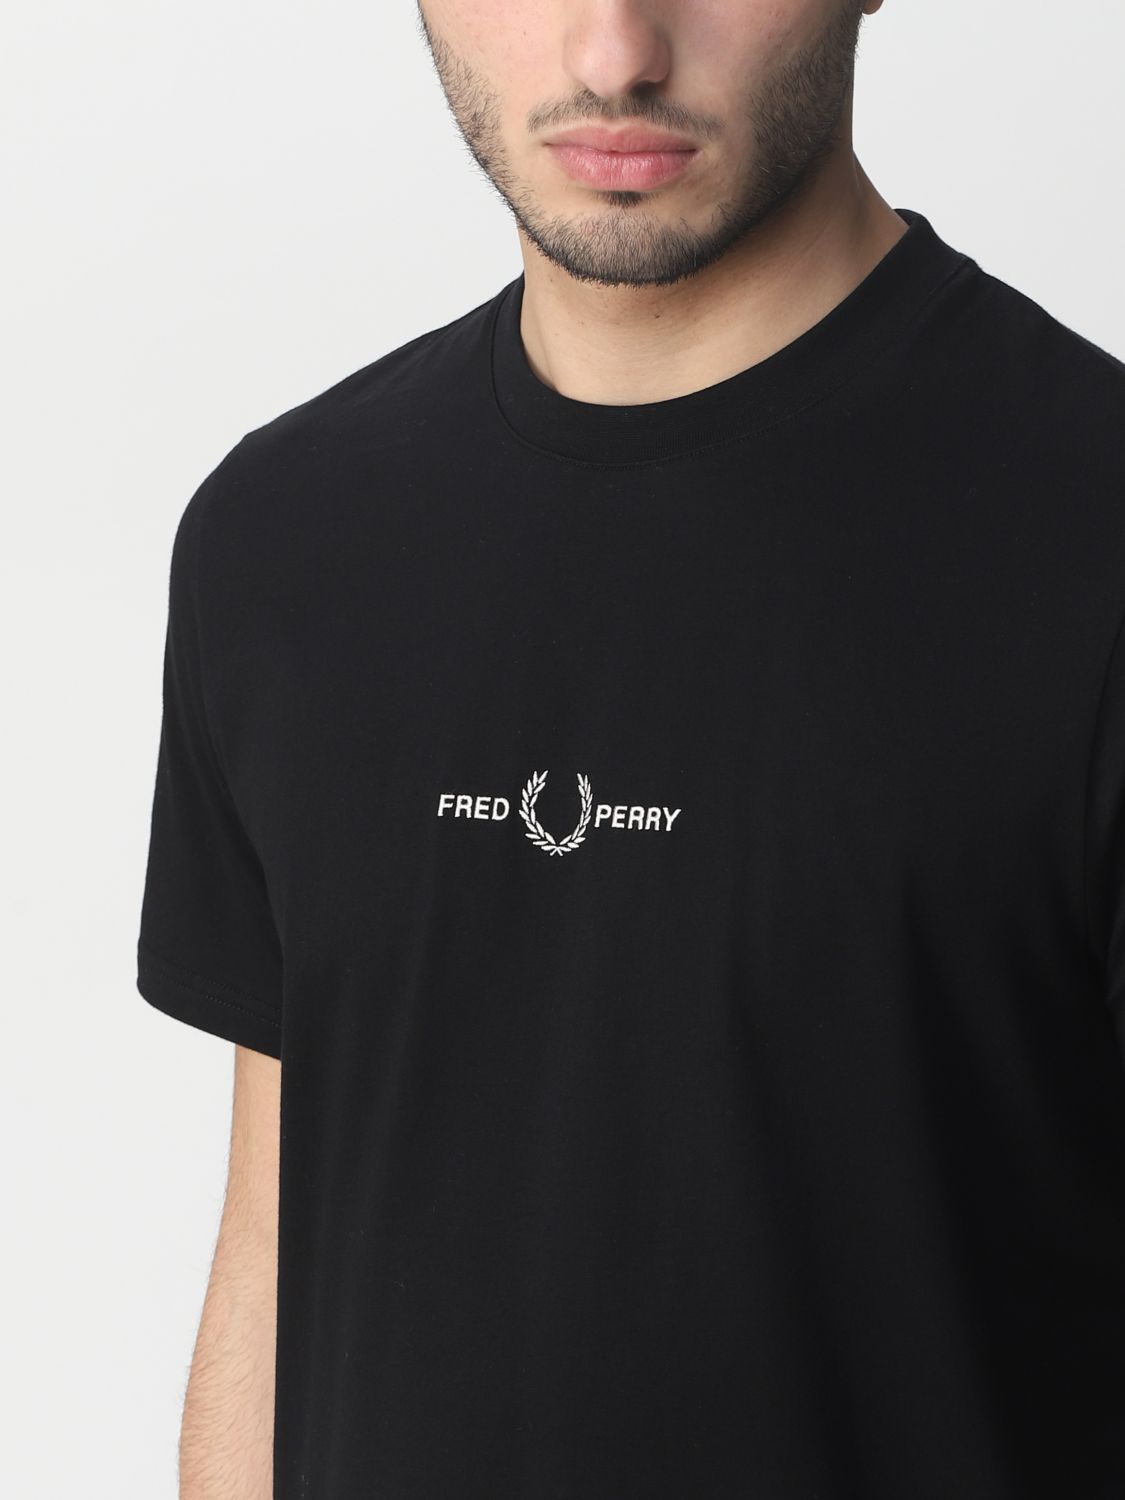 Tシャツ Fred Perry: Tシャツ メンズ Fred Perry ブラック 3